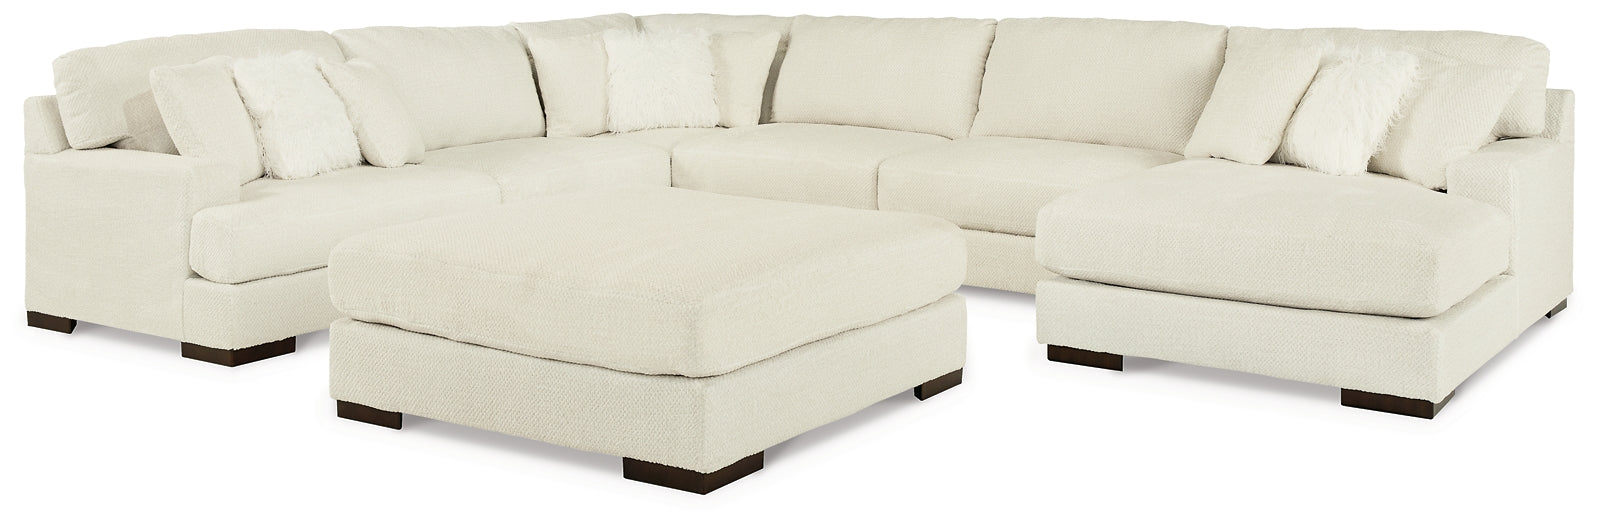 Zada 5-Piece Sectional with Ottoman Rent Wise Rent To Own Jacksonville, Florida